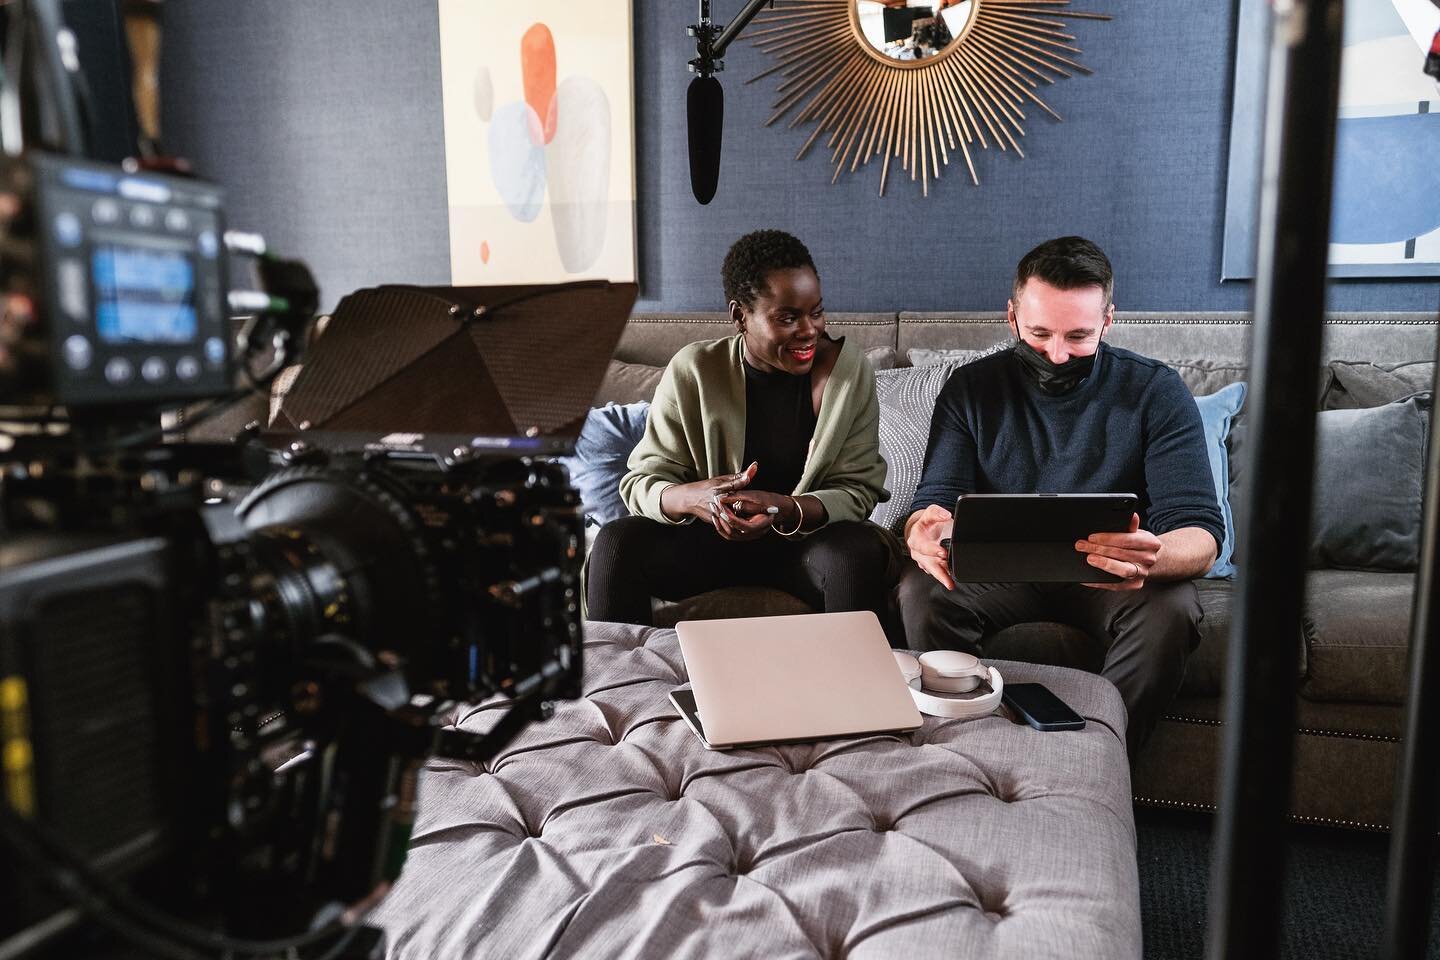 Had a fantastic time last week directing a commercial for @audible starring @tune2tunde and @elyse_myers 🙌🤓🎥🎬

Thanks so much to @inhouseteam @acdrummer @al0728 for trusting me to take the reins on this super fun and creative shoot! 

📷 @brianmu